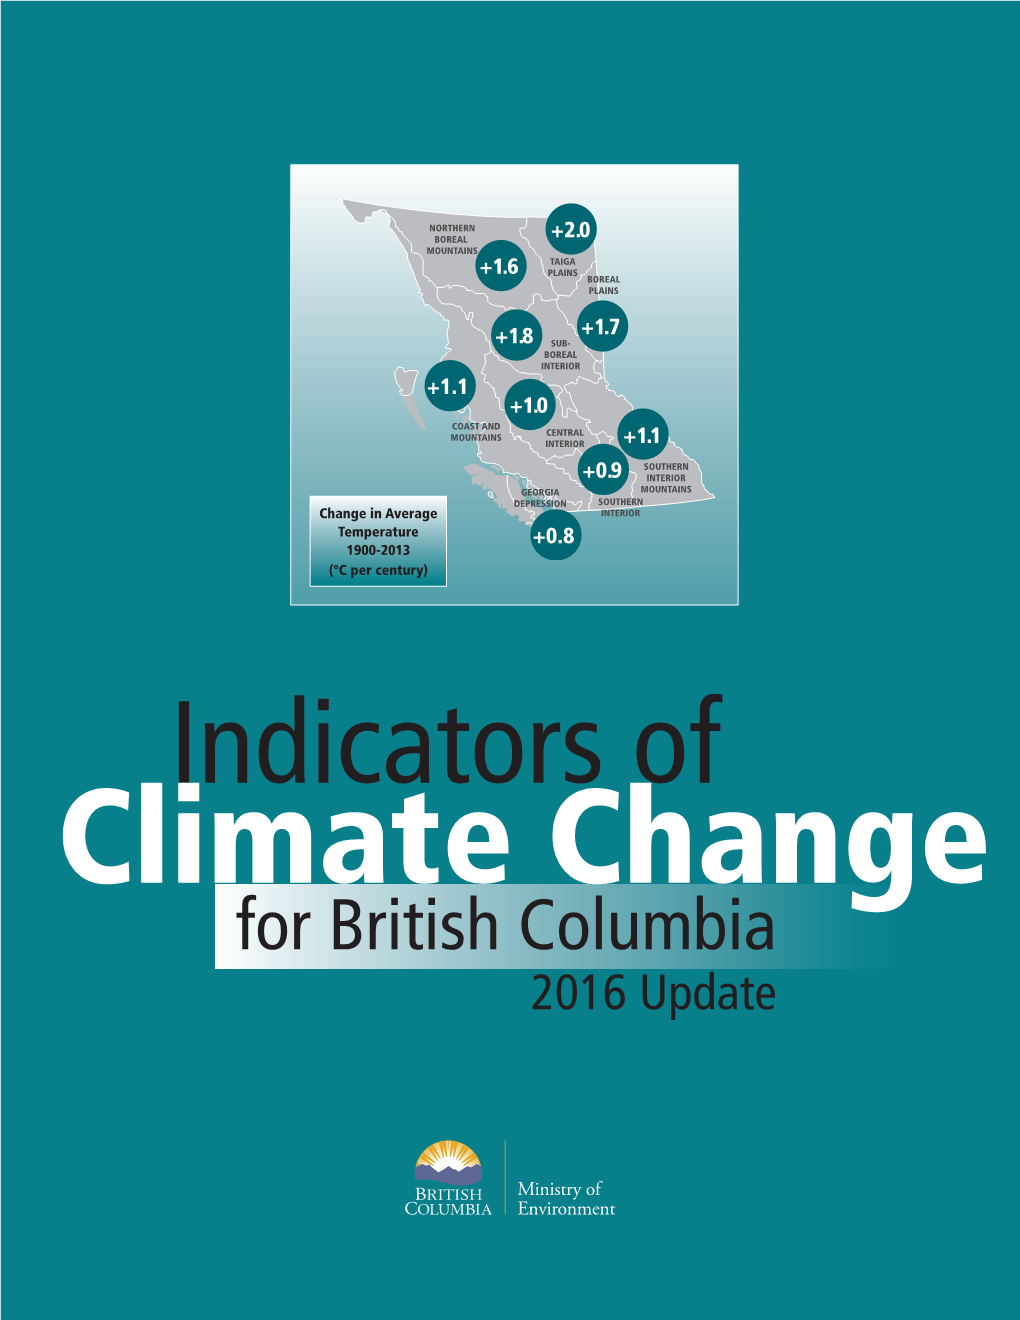 Indicators of Climate Change for British Columbia 2016 Update